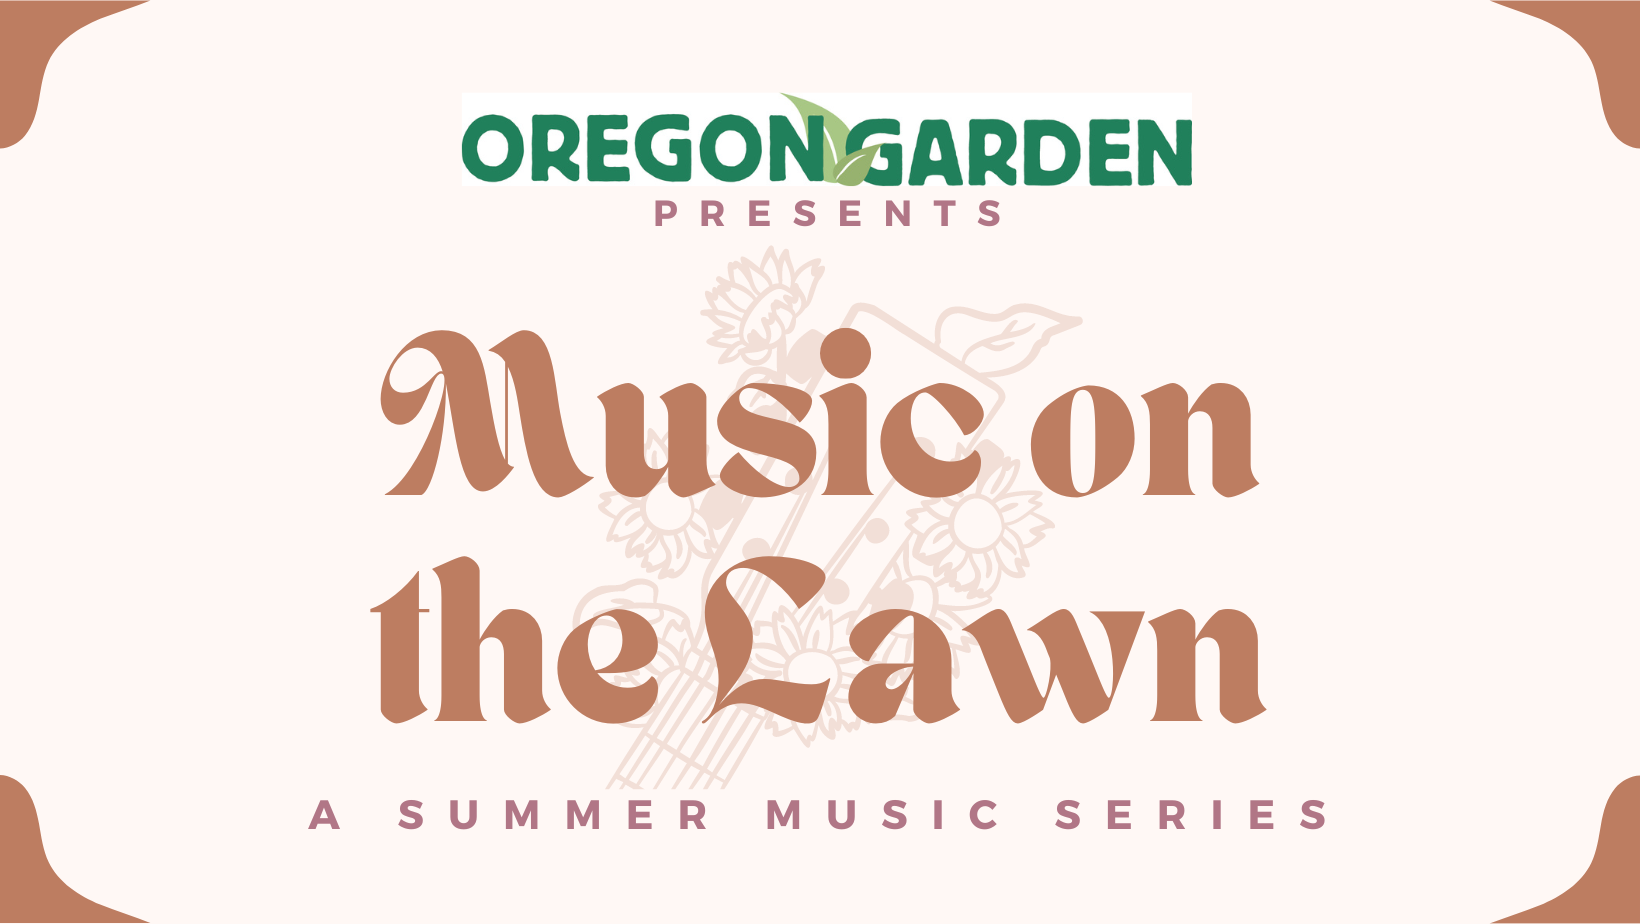 Concerts at The Oregon Garden